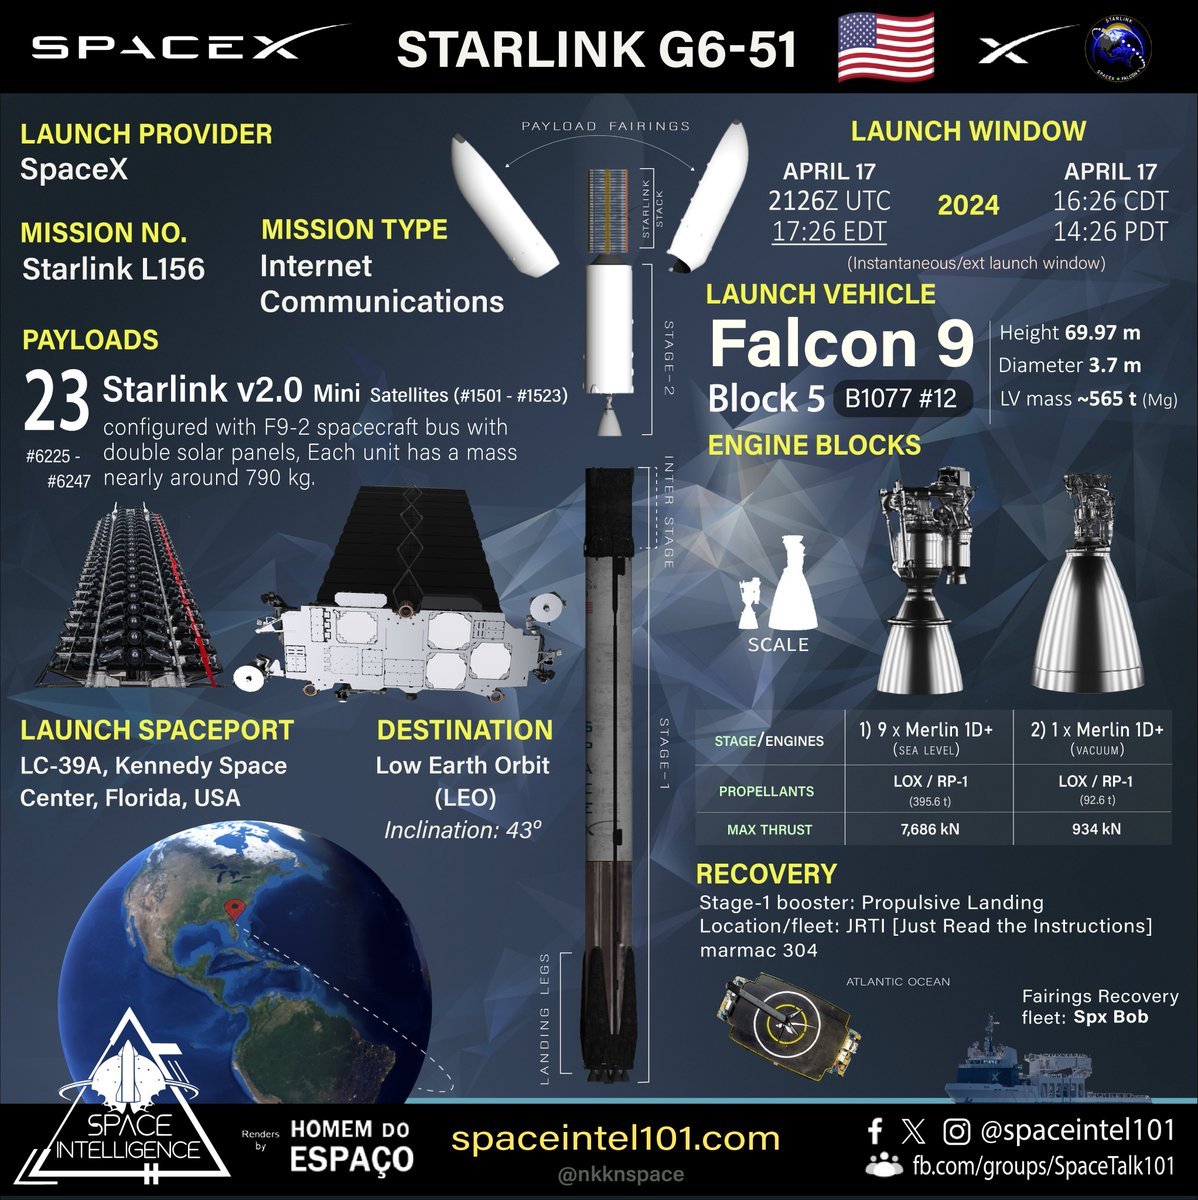 Orbital launch no. 74 of 2024 🇺🇲🚀⭐🔗🛰️➕ Starlink L156 | SpaceX | April 17 | 2126 UTC @SpaceX's 26th #Starlink mission of 2024 to launch 23 v2.0 @Starlink Mini🛰️ on its #Falcon9 #B1077.12🚀 to 43° Low Earth Orbit from @NASAKennedy LC-39A, Cape Canaveral. The booster flies for